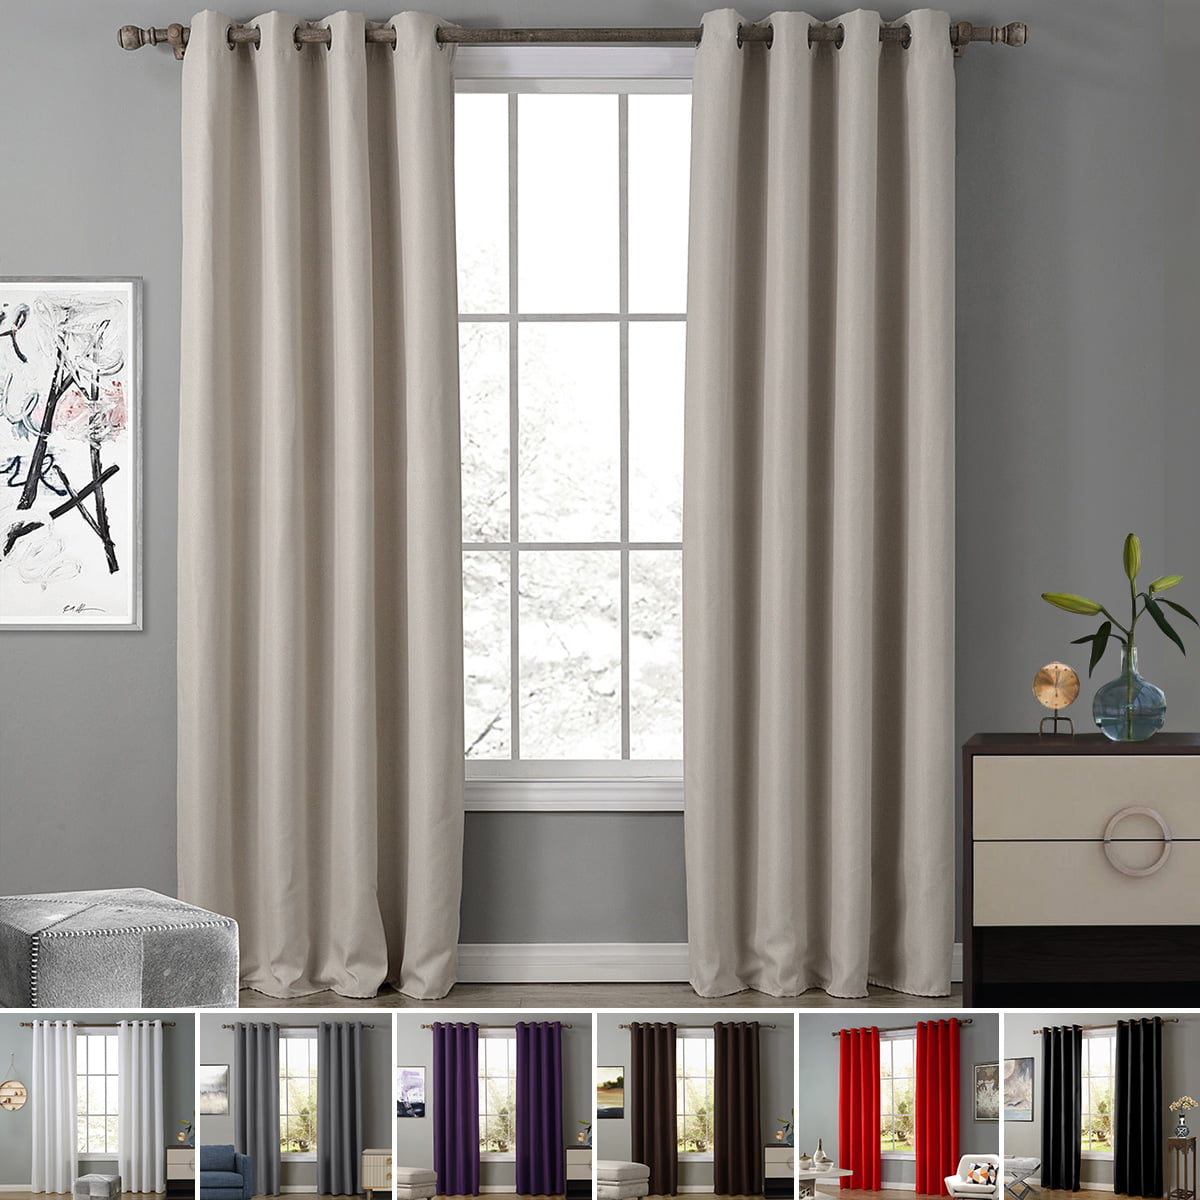 HOTEL QUALITY THERMAL BLACKOUT CURTAINS EYELET READY MADE RING TOP CURTAIN PAIR 